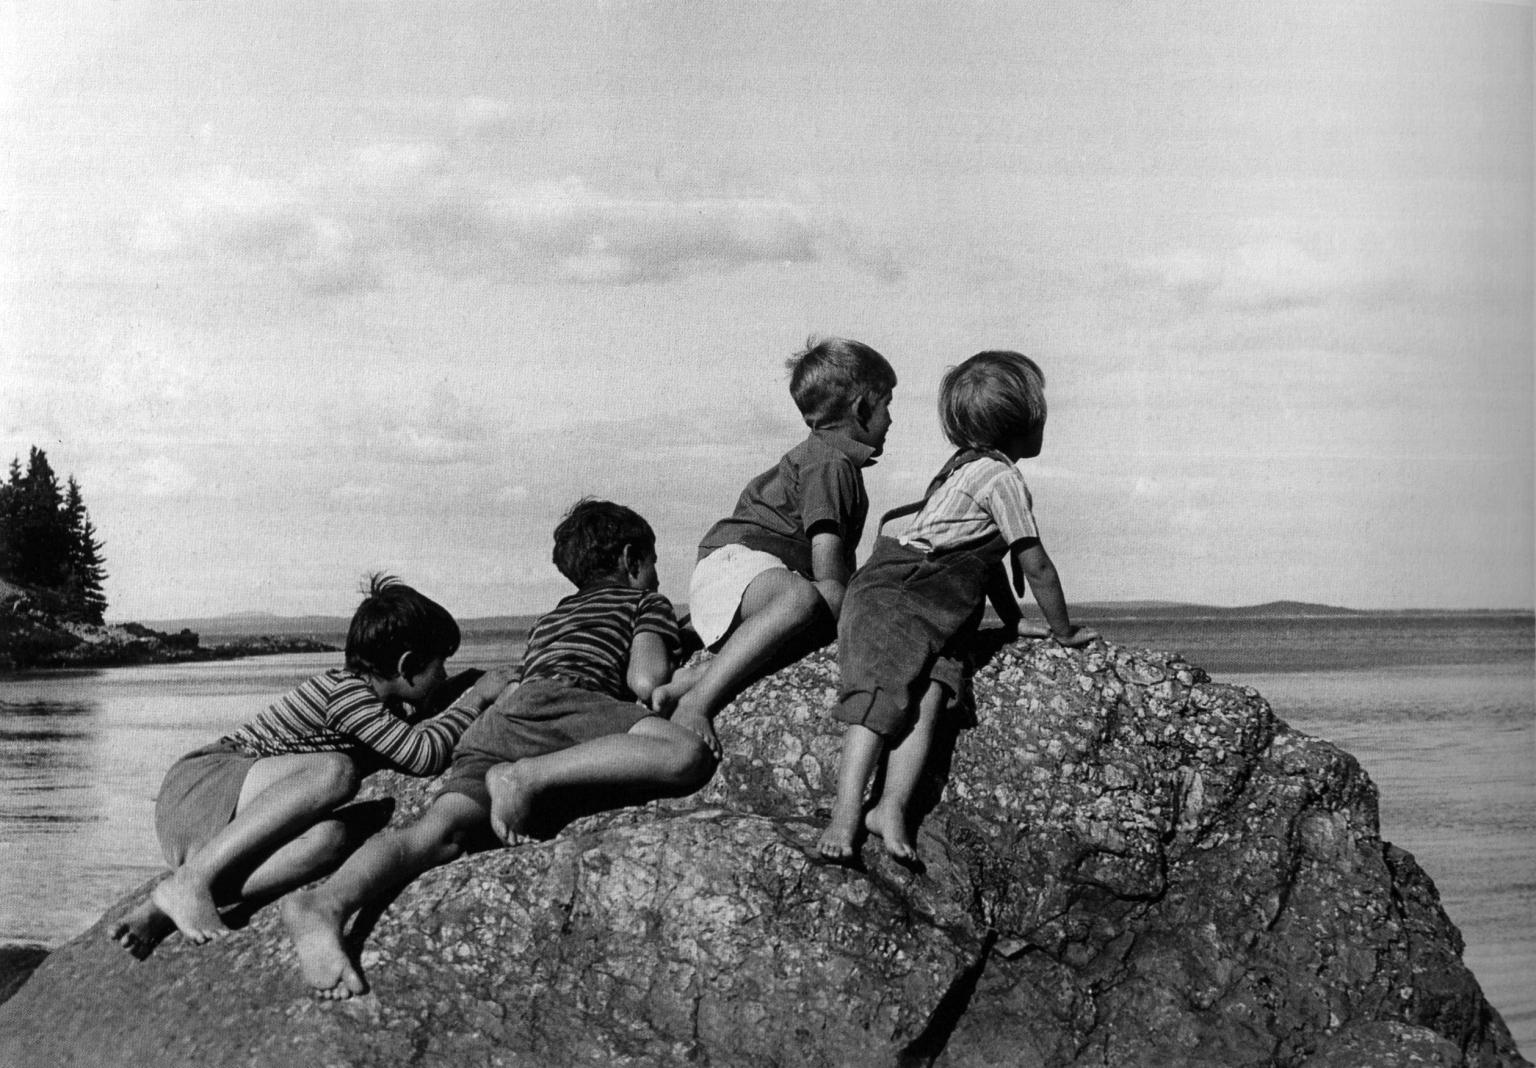 Photograph of four boys perched on a rock overlooking water and facing away from viewer.